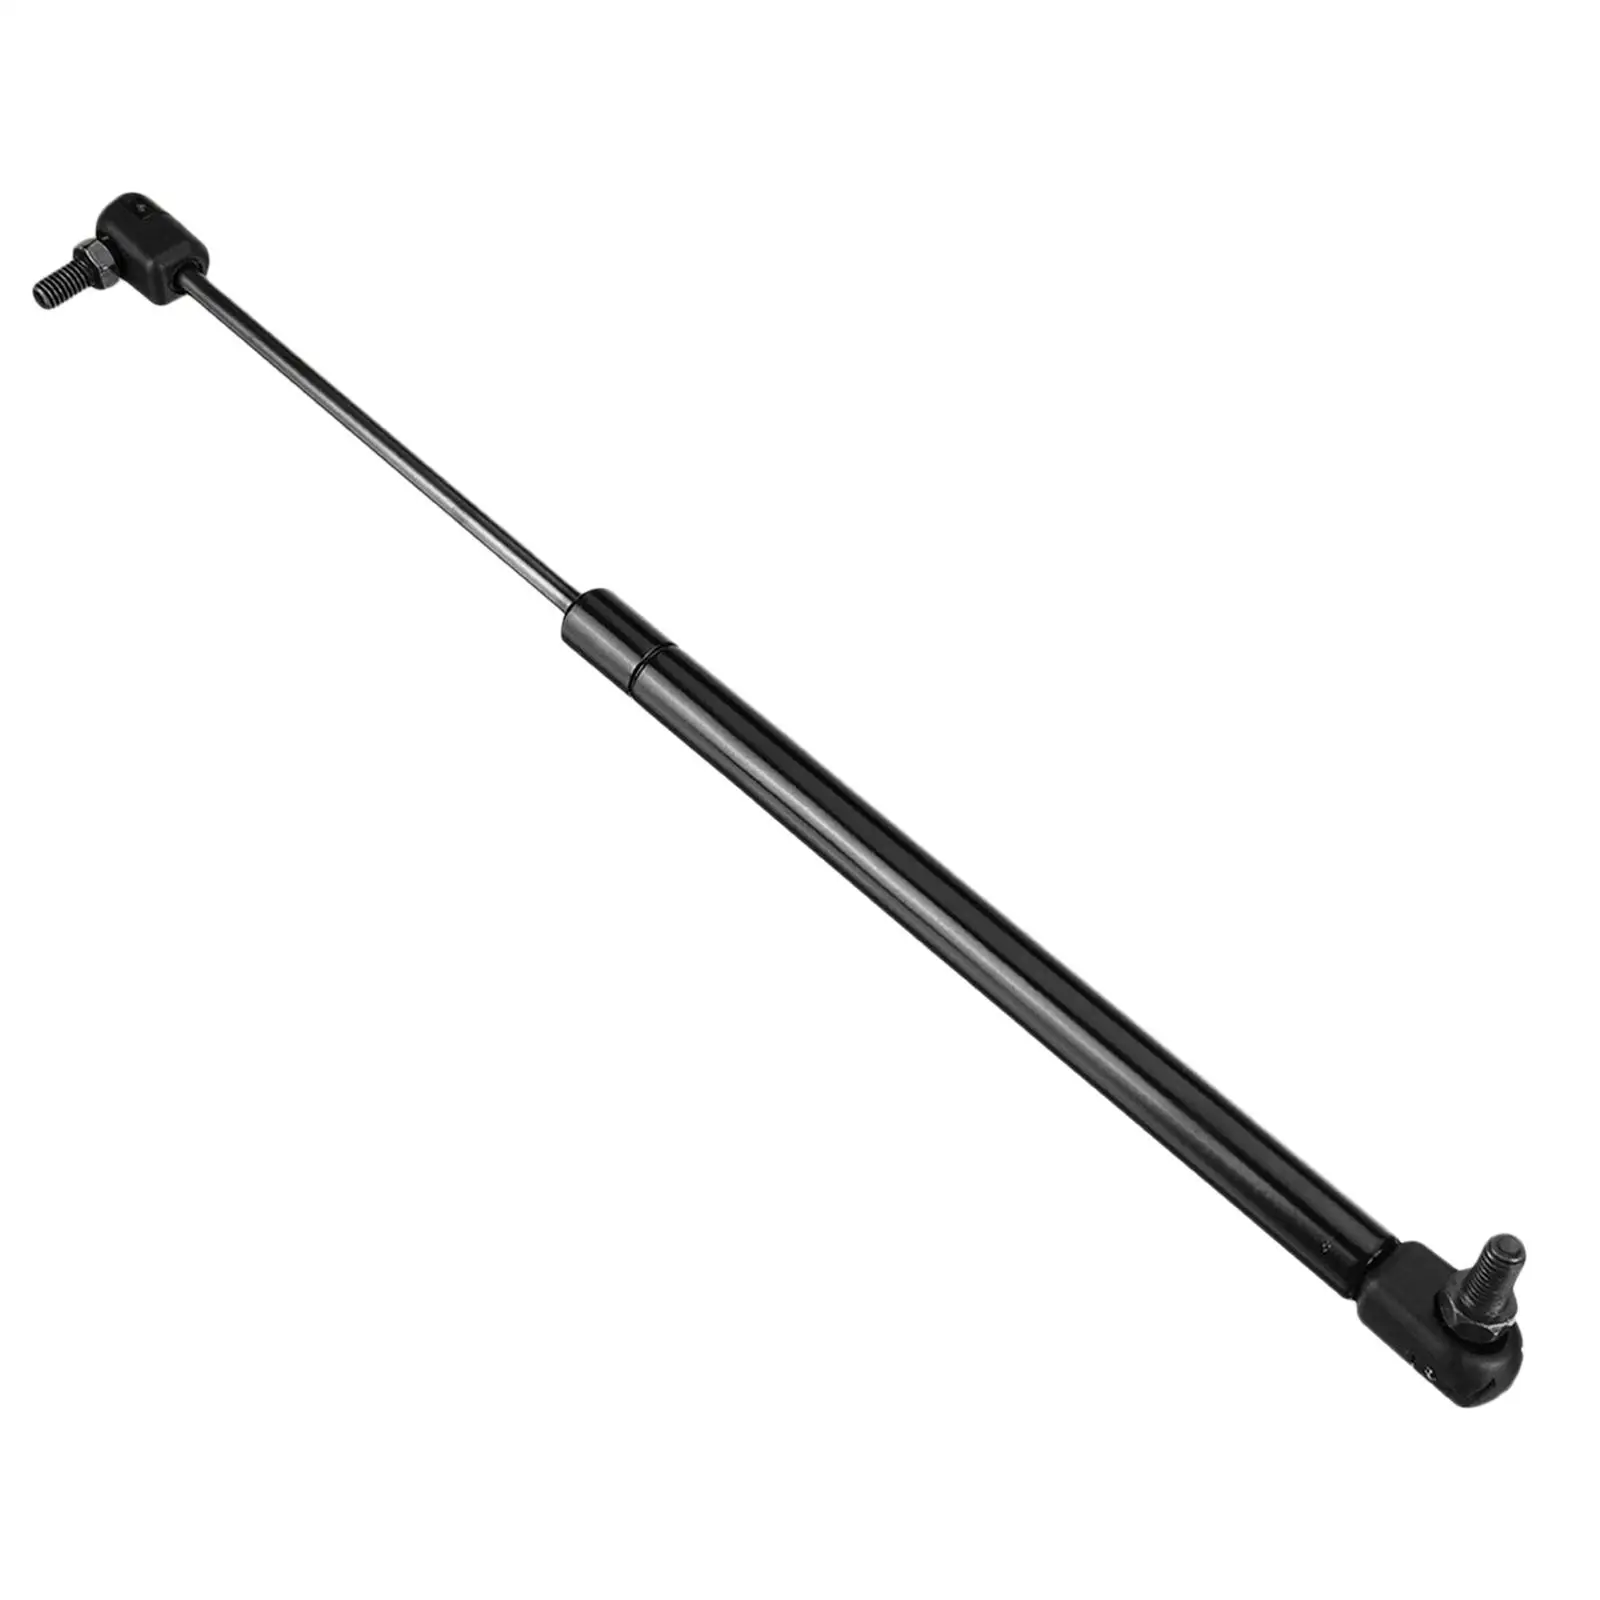 Telescopic Gas Locker Spring Strut 110N Hgi4694347 Arm Shock Lift Support Lid Stay Fits for Caravan Replacement Accessories